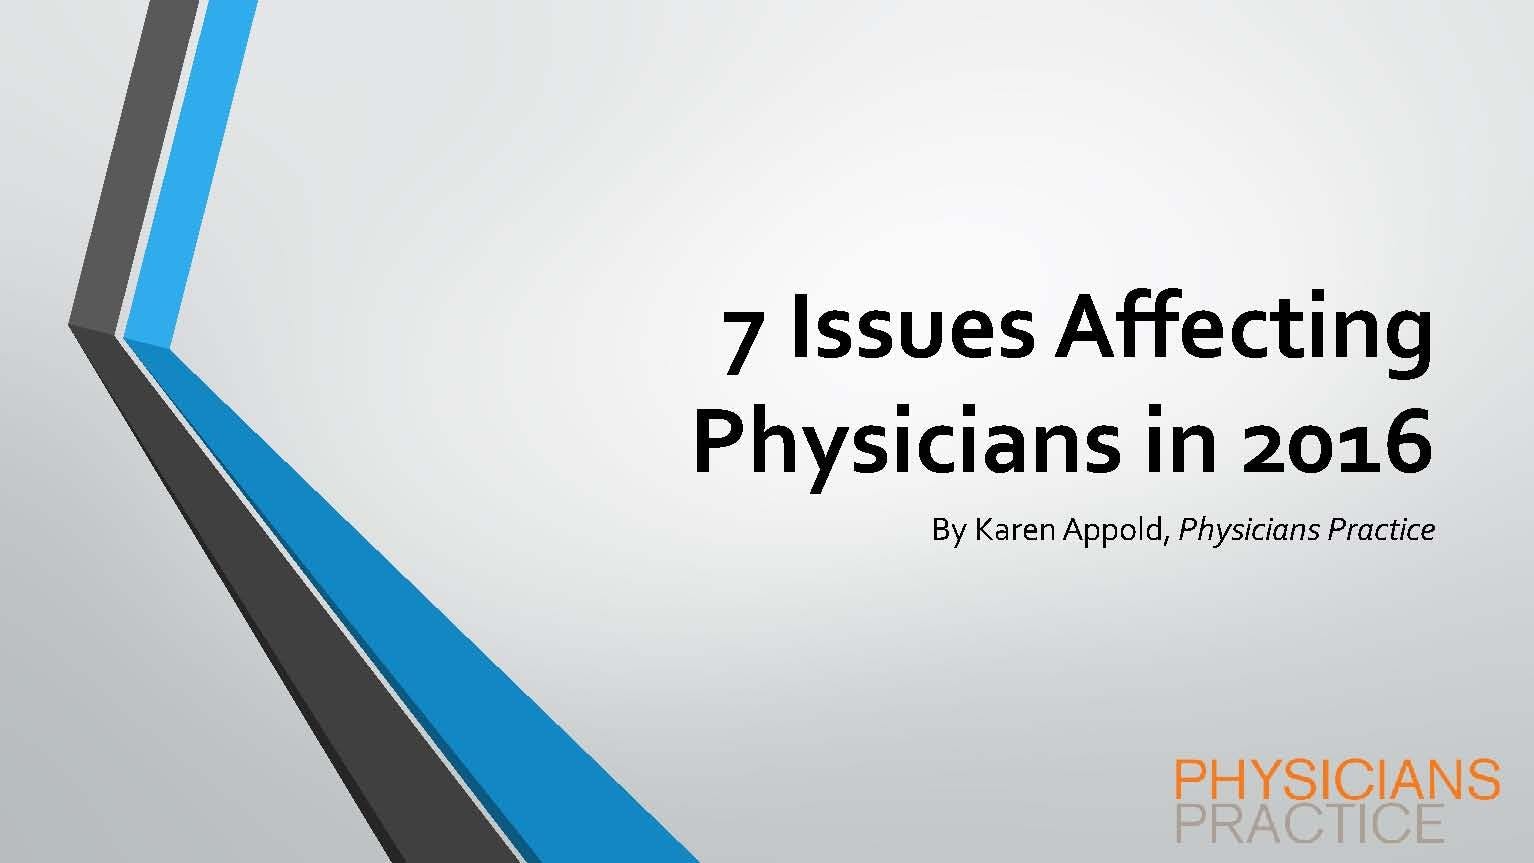 7 Issues Affecting Physicians in 2016